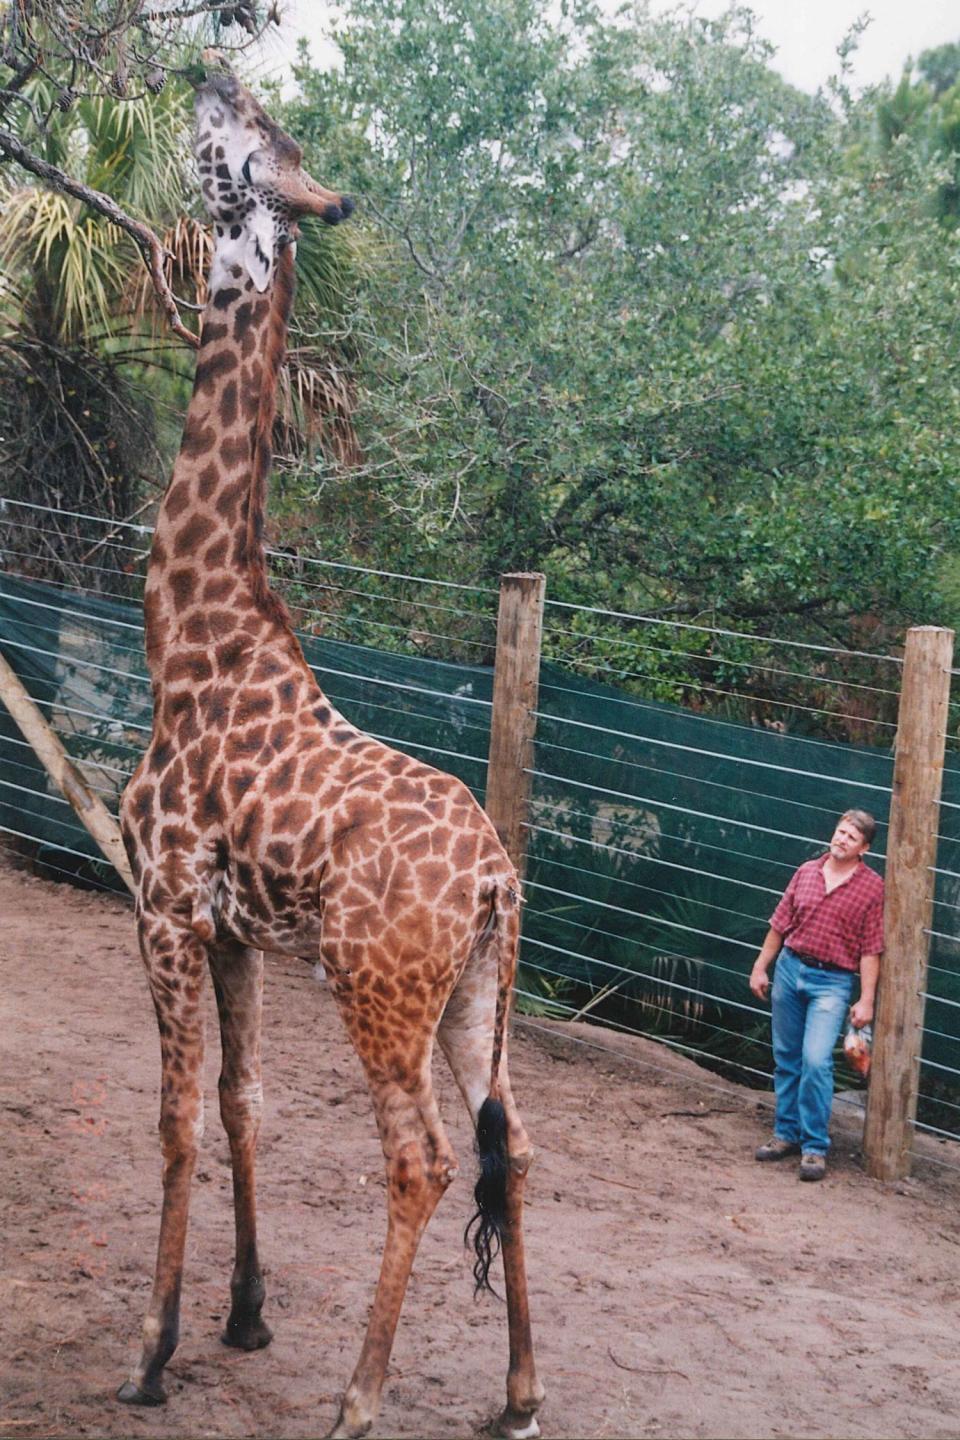 Rafiki was known for greeting his keepers each morning and following them around the habitat.